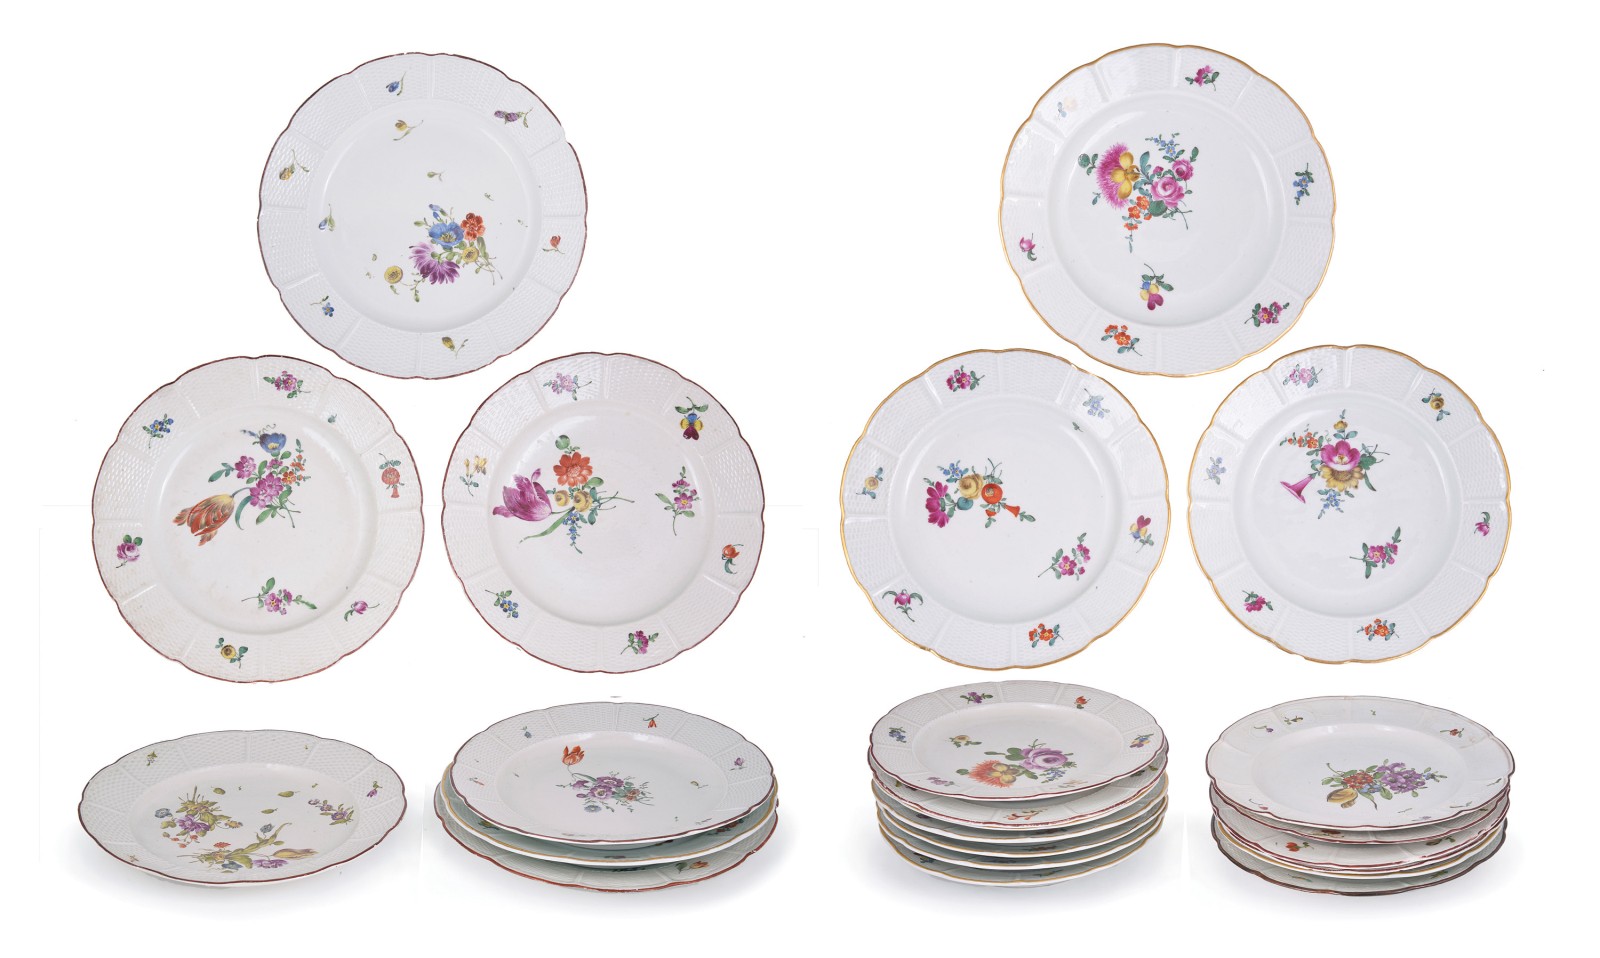 A SET OF ELEVEN LUDWIGSBURG PLATES, CIRCA 1800 painted with floral sprays surrounded by scattered